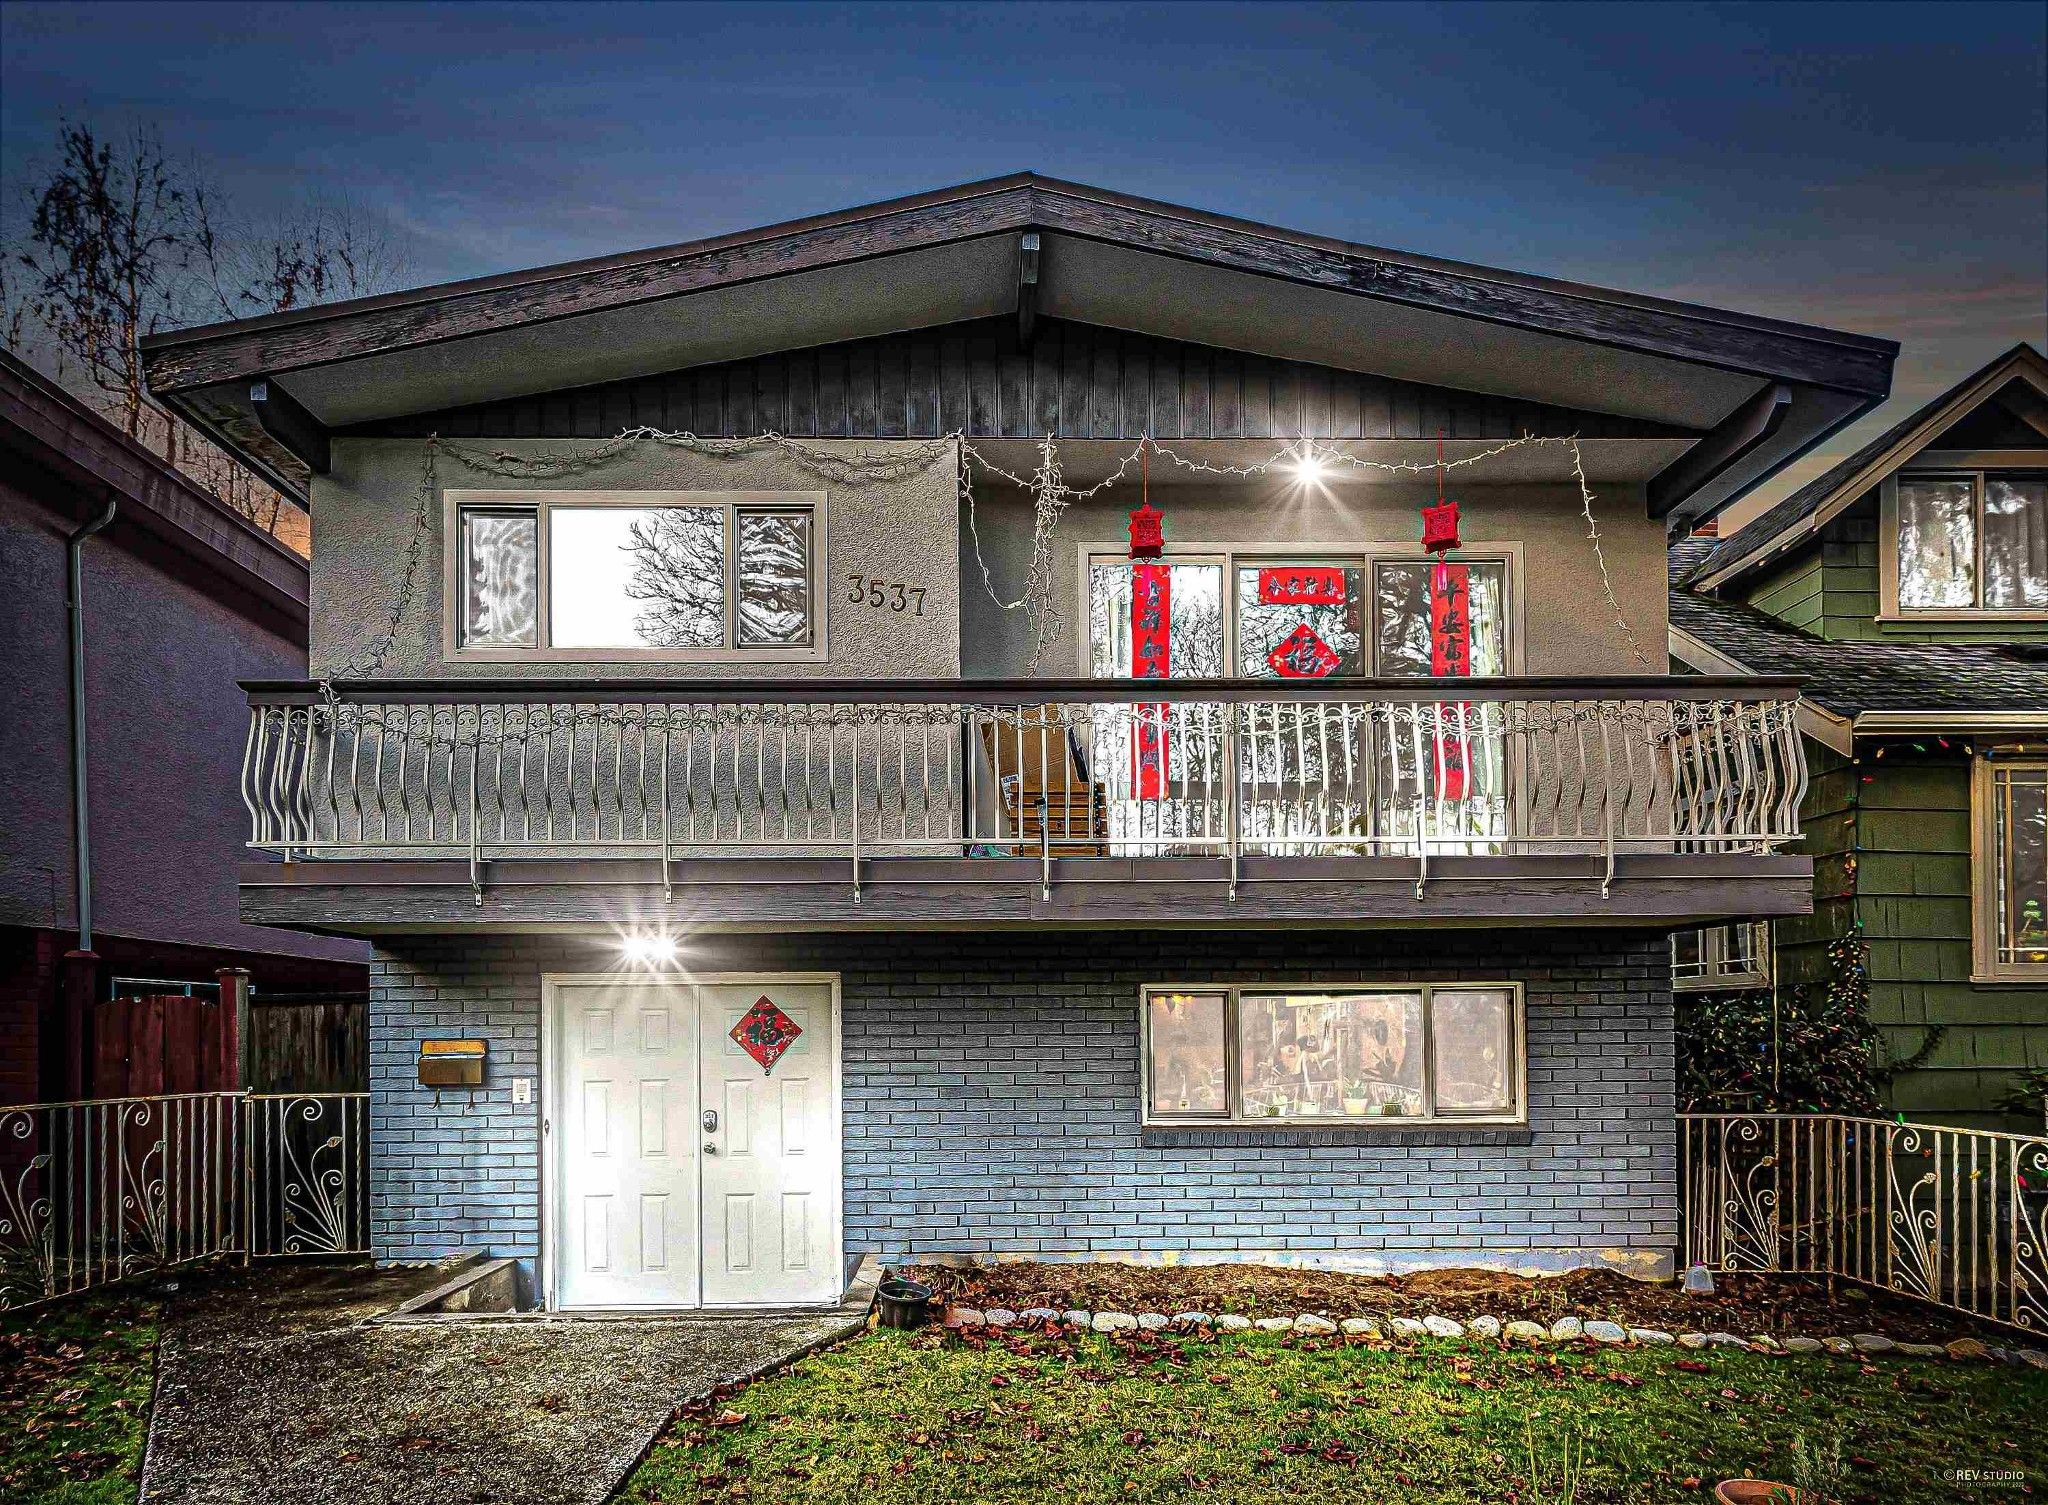 Main Photo: 3537 W King Edward in Vancouver: Dunbar House for sale (Vancouver West)  : MLS®# V6S 1M4